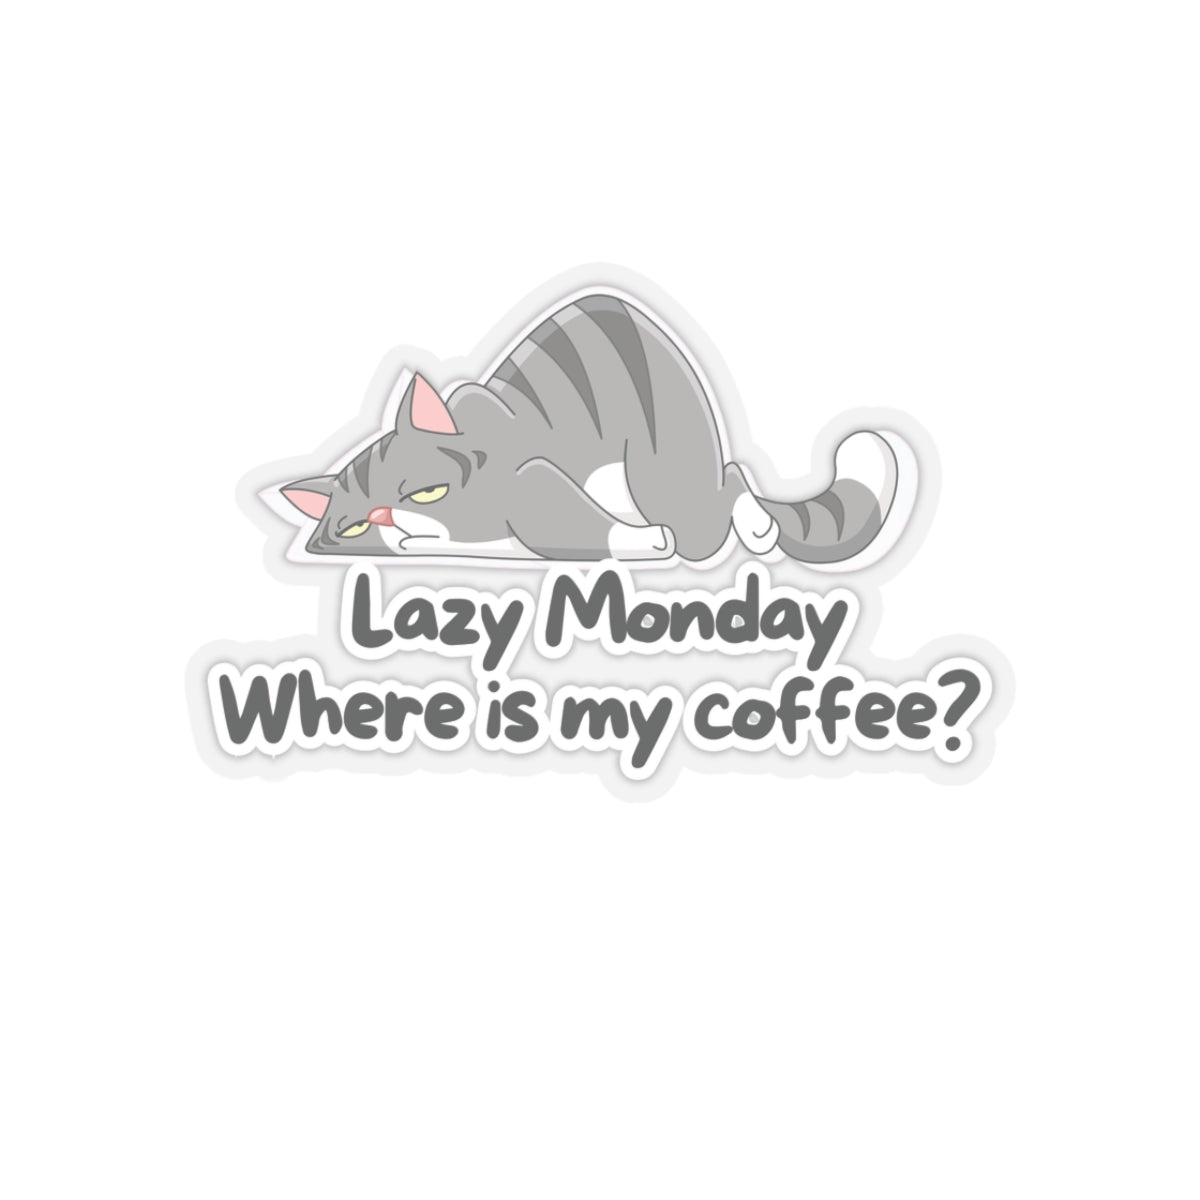 Lazy Monday Where Is My Coffee Quote Kiss-Cut Stickers-Paper products-3" × 3"-Transparent-mysticalcherry